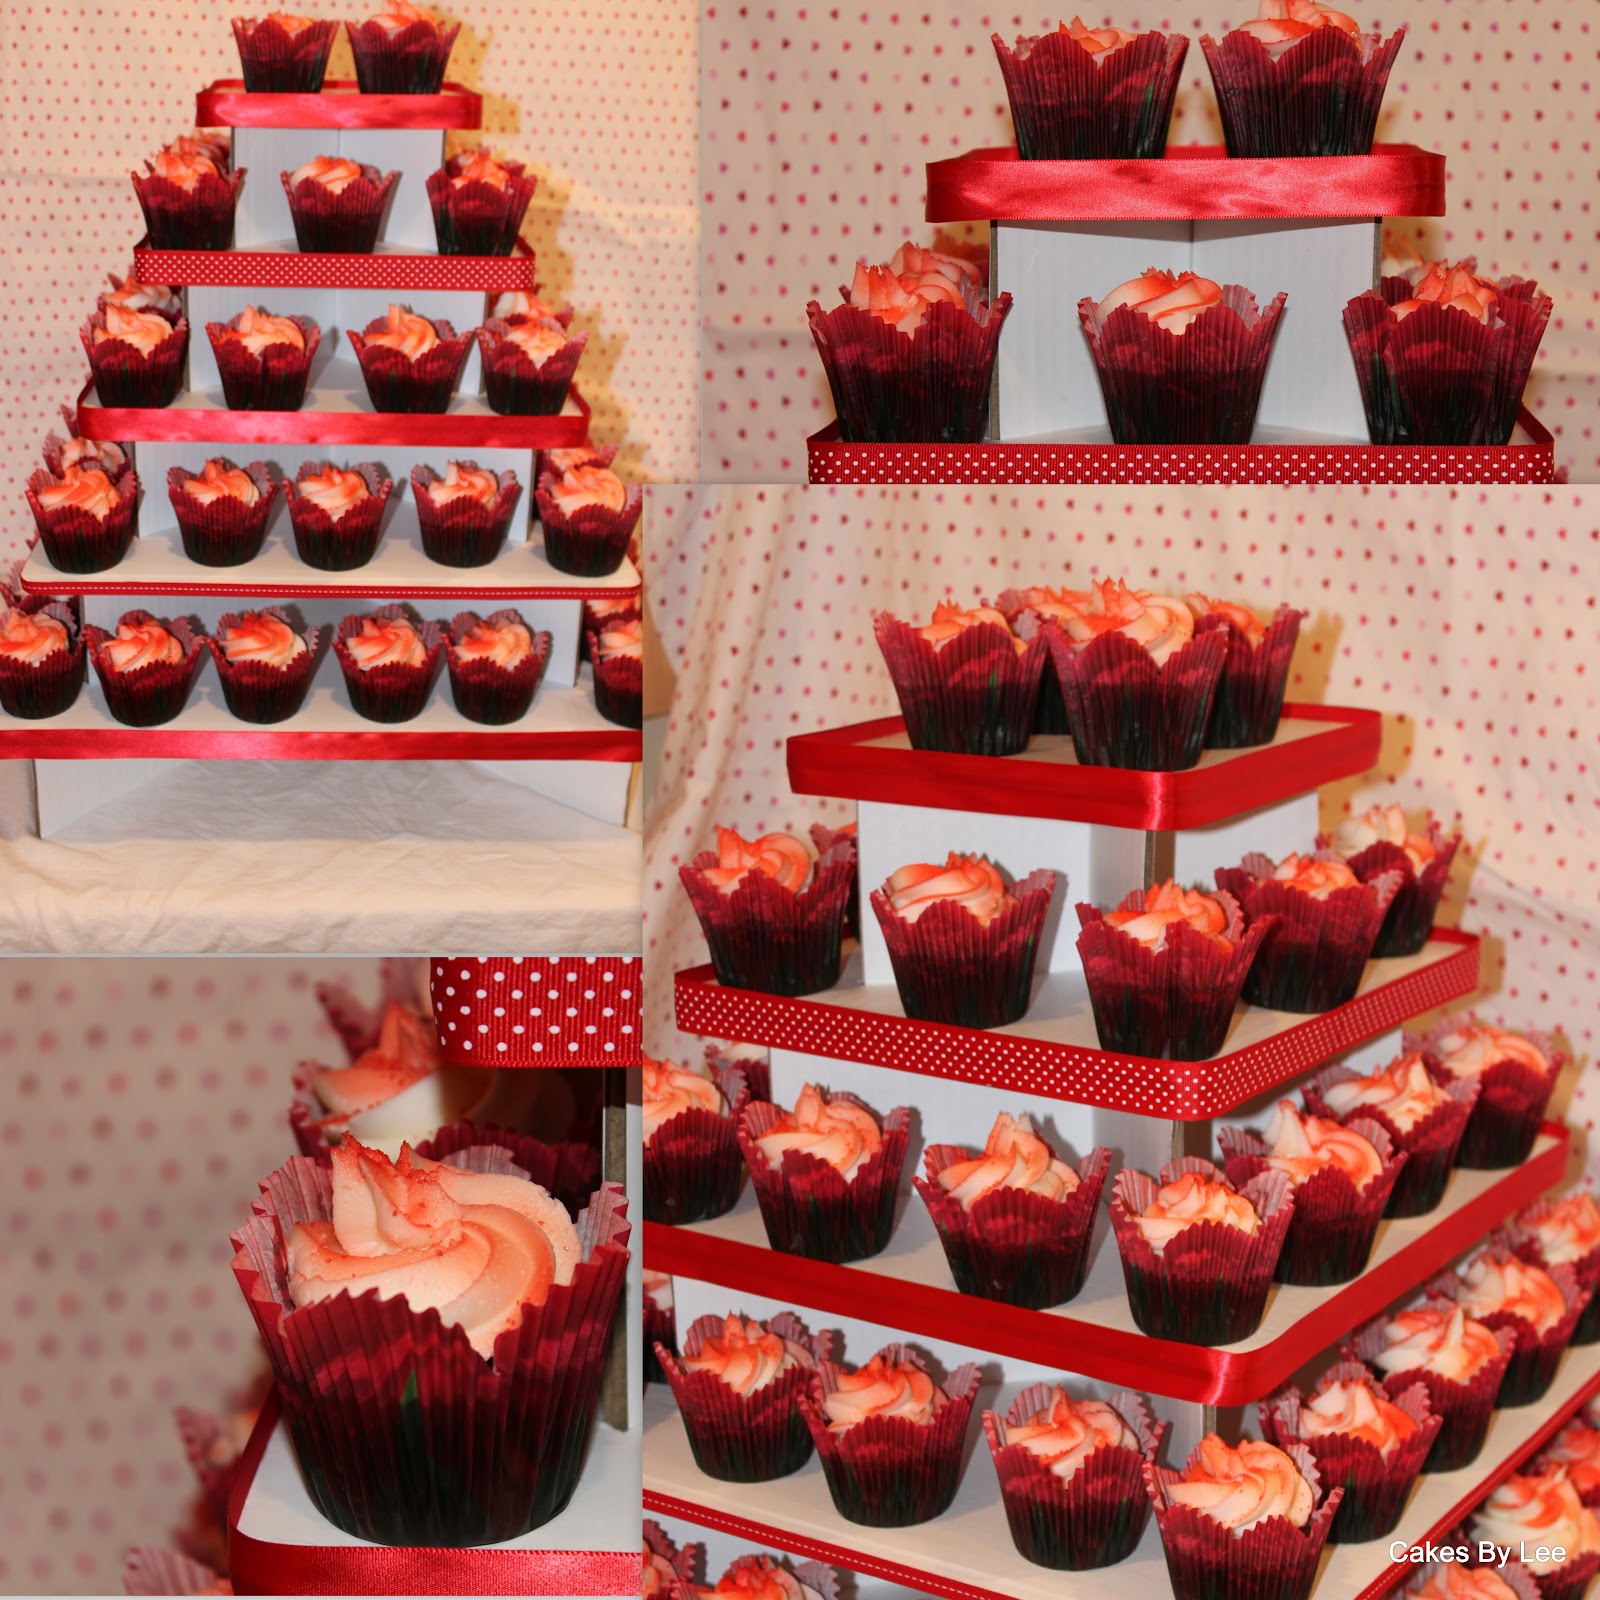 wedding cake delivery boxes Heart Shaped Cake box with candies